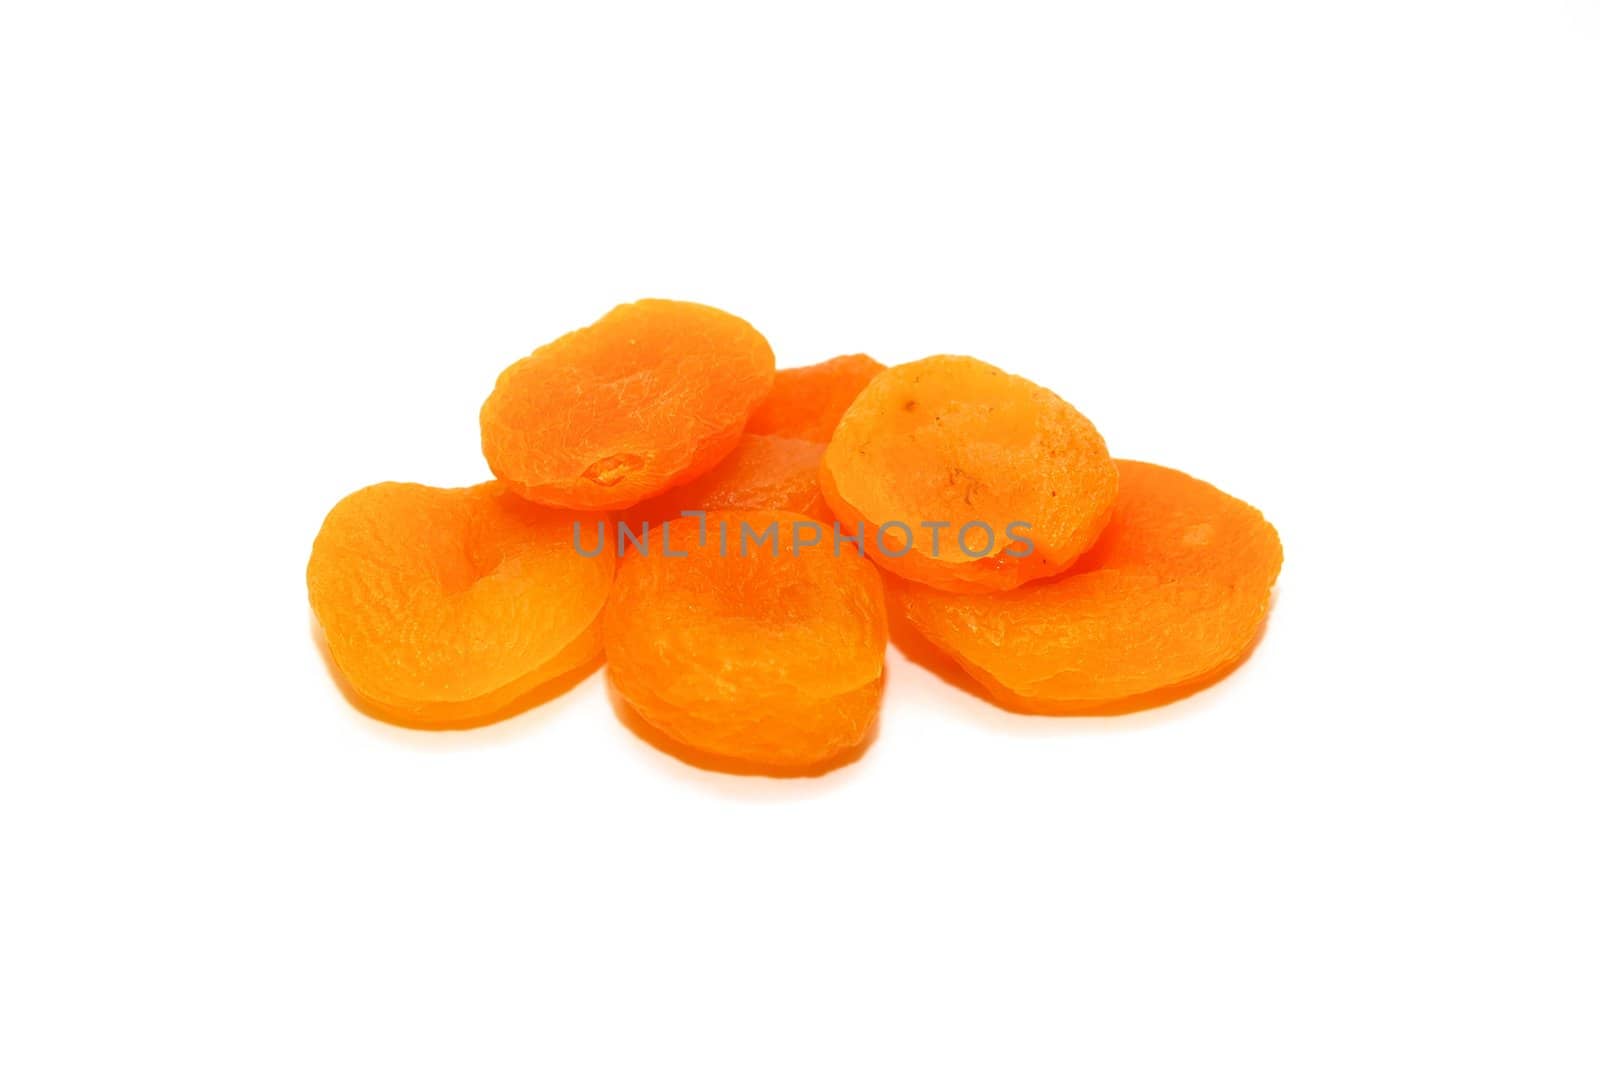 photo of the dried apricots on white background